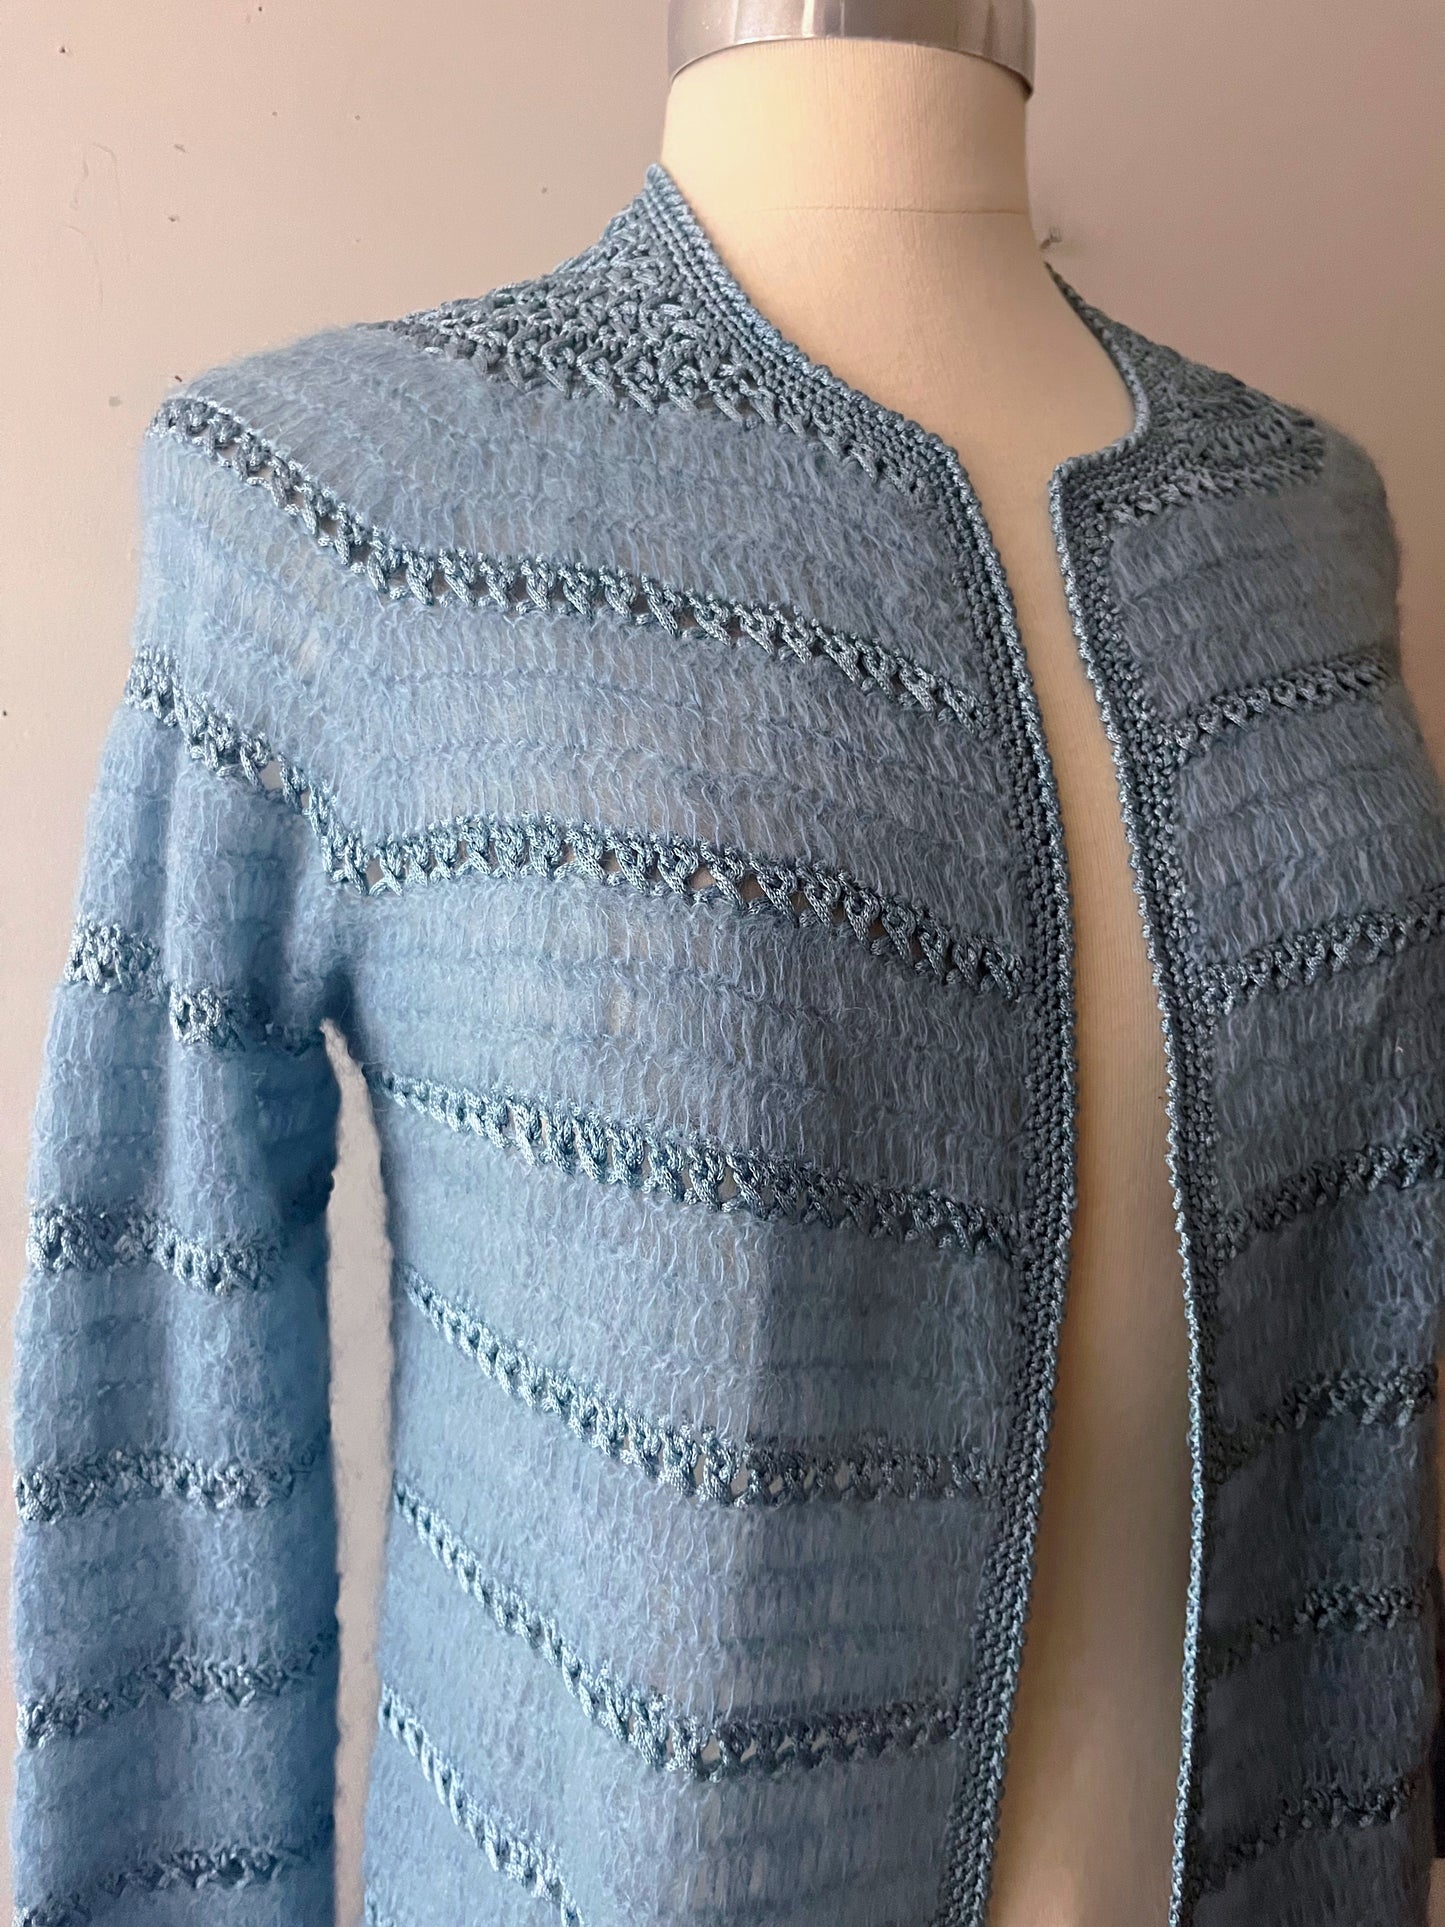 Crocheted Mohair Knit Sweater